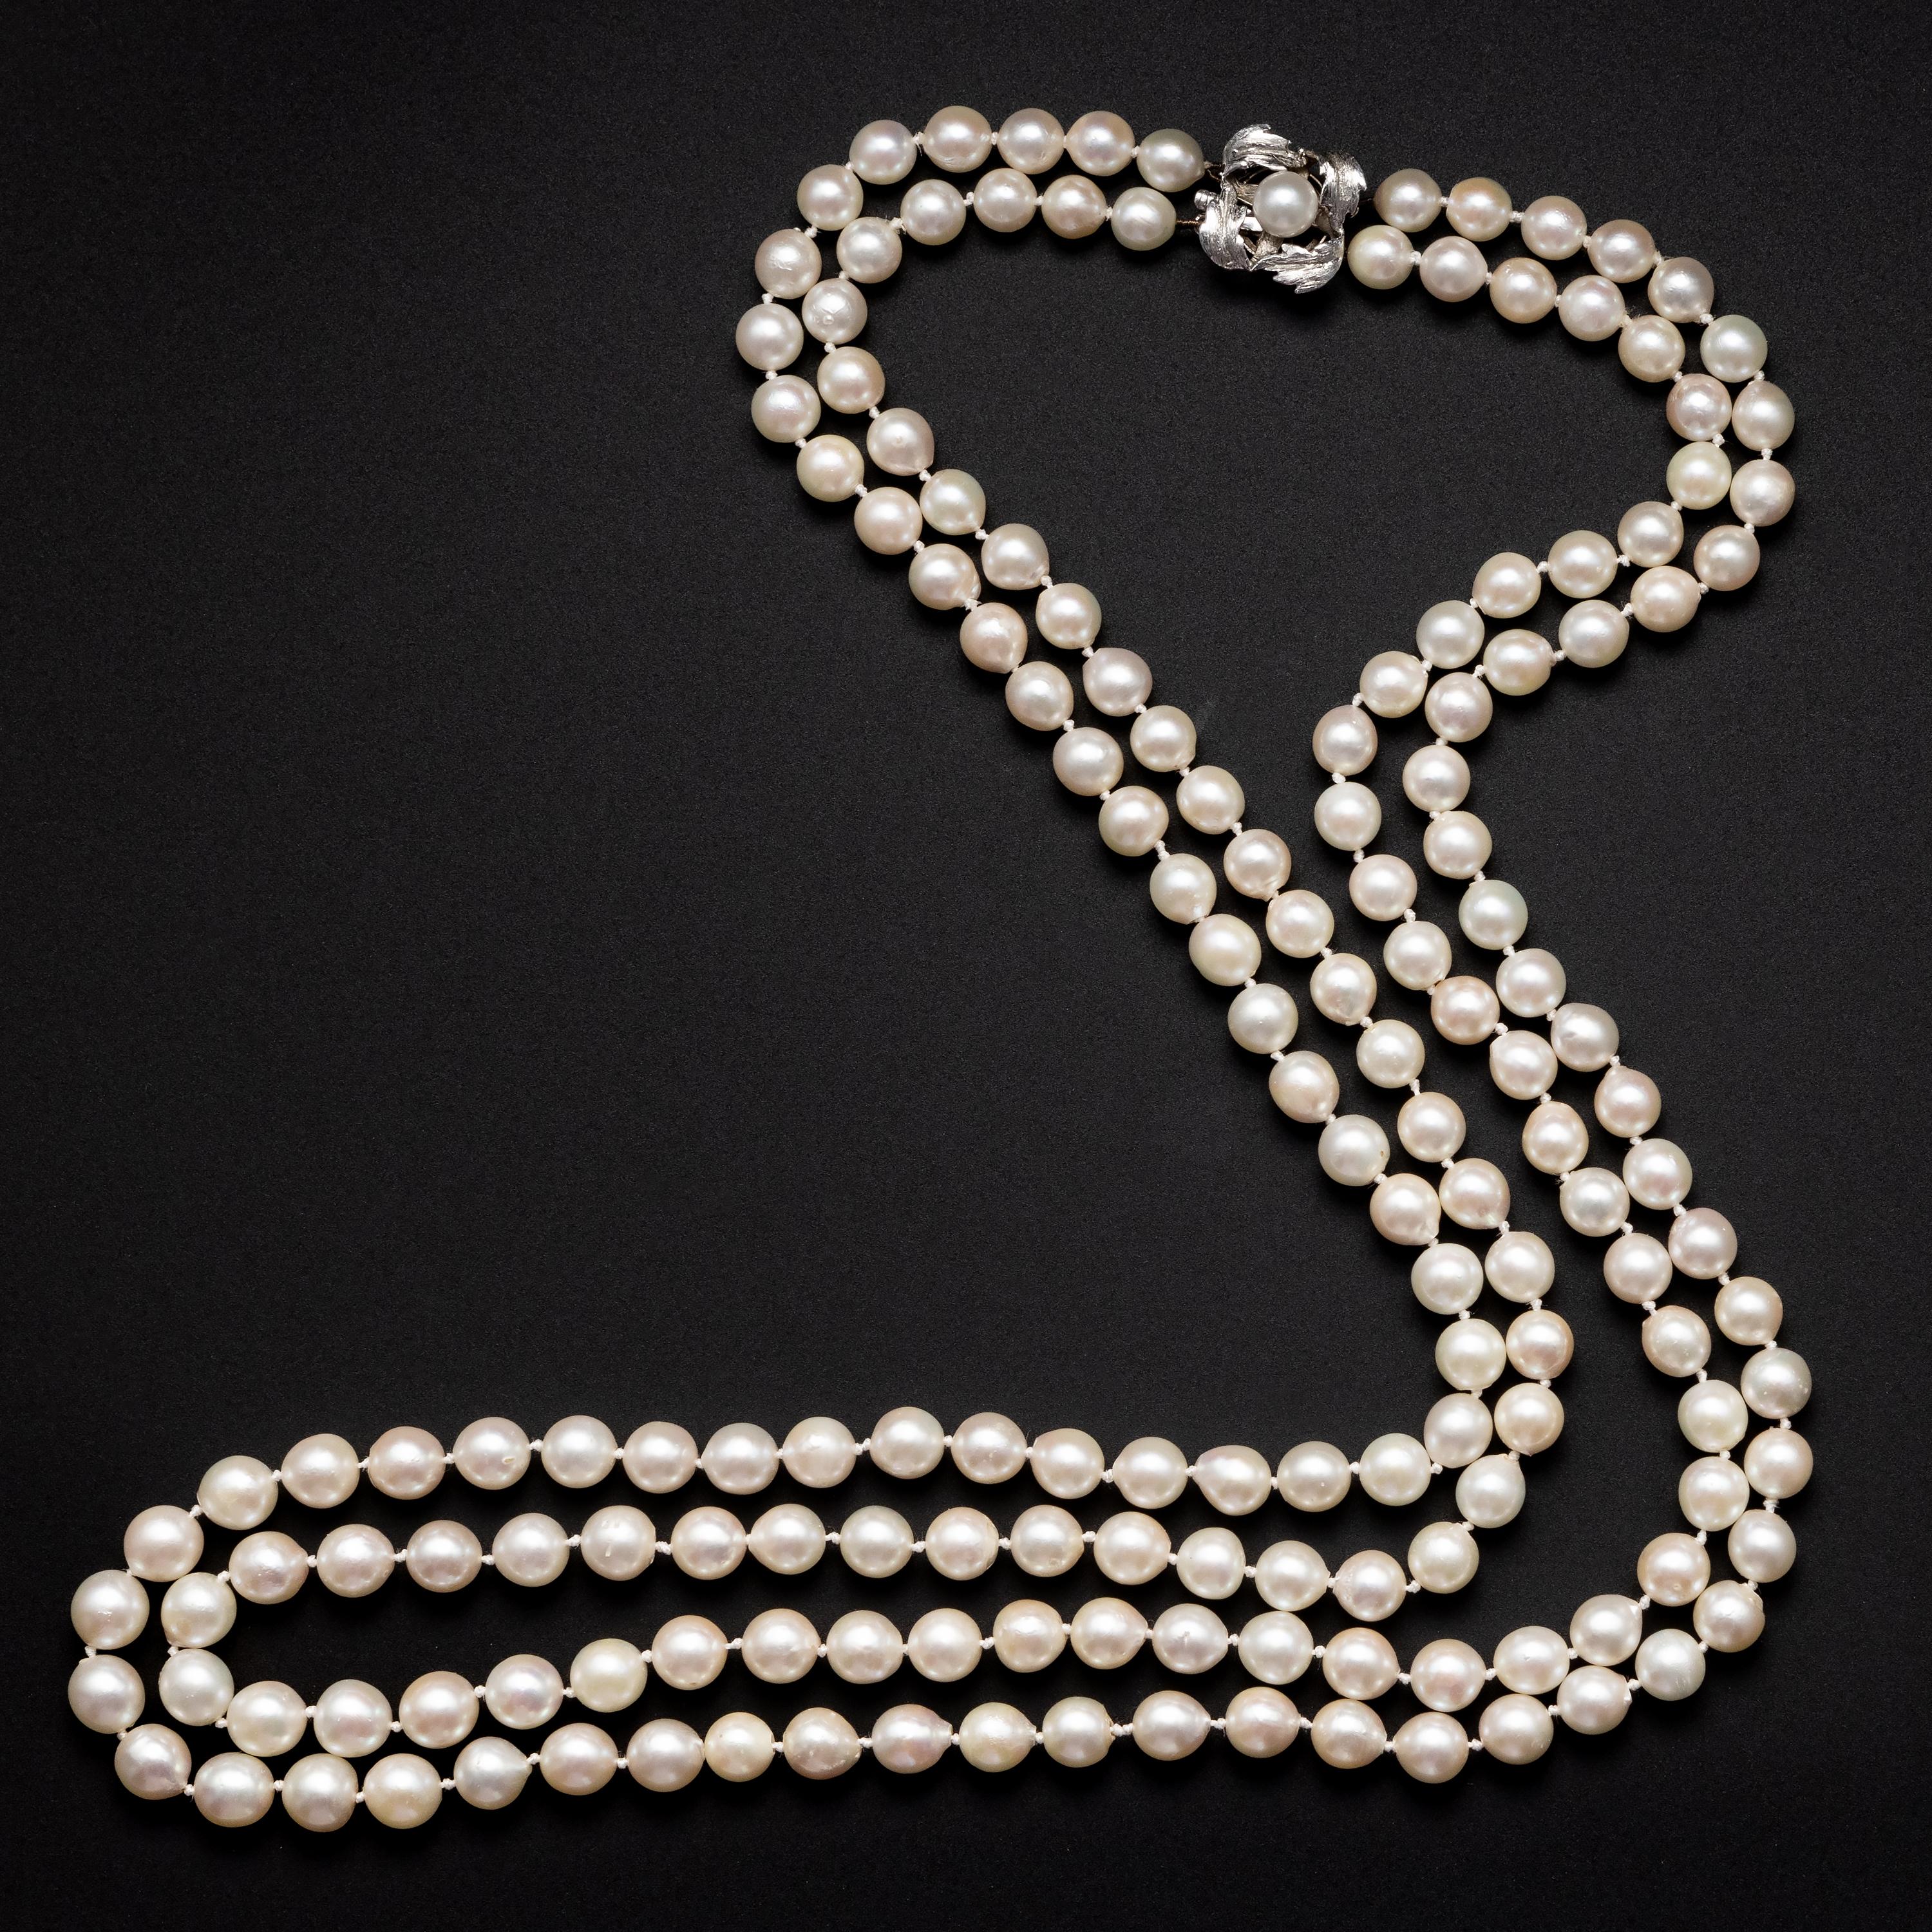 Treat yourself to the everyday luxury of a vintage double-strand Akoya pearl necklace. This circa 1950s jewel is composed of 170 near-round lustrous, white cultured Akoya pearls that gently graduate in size from 6.5mm to 7.5mm. These pearls are a